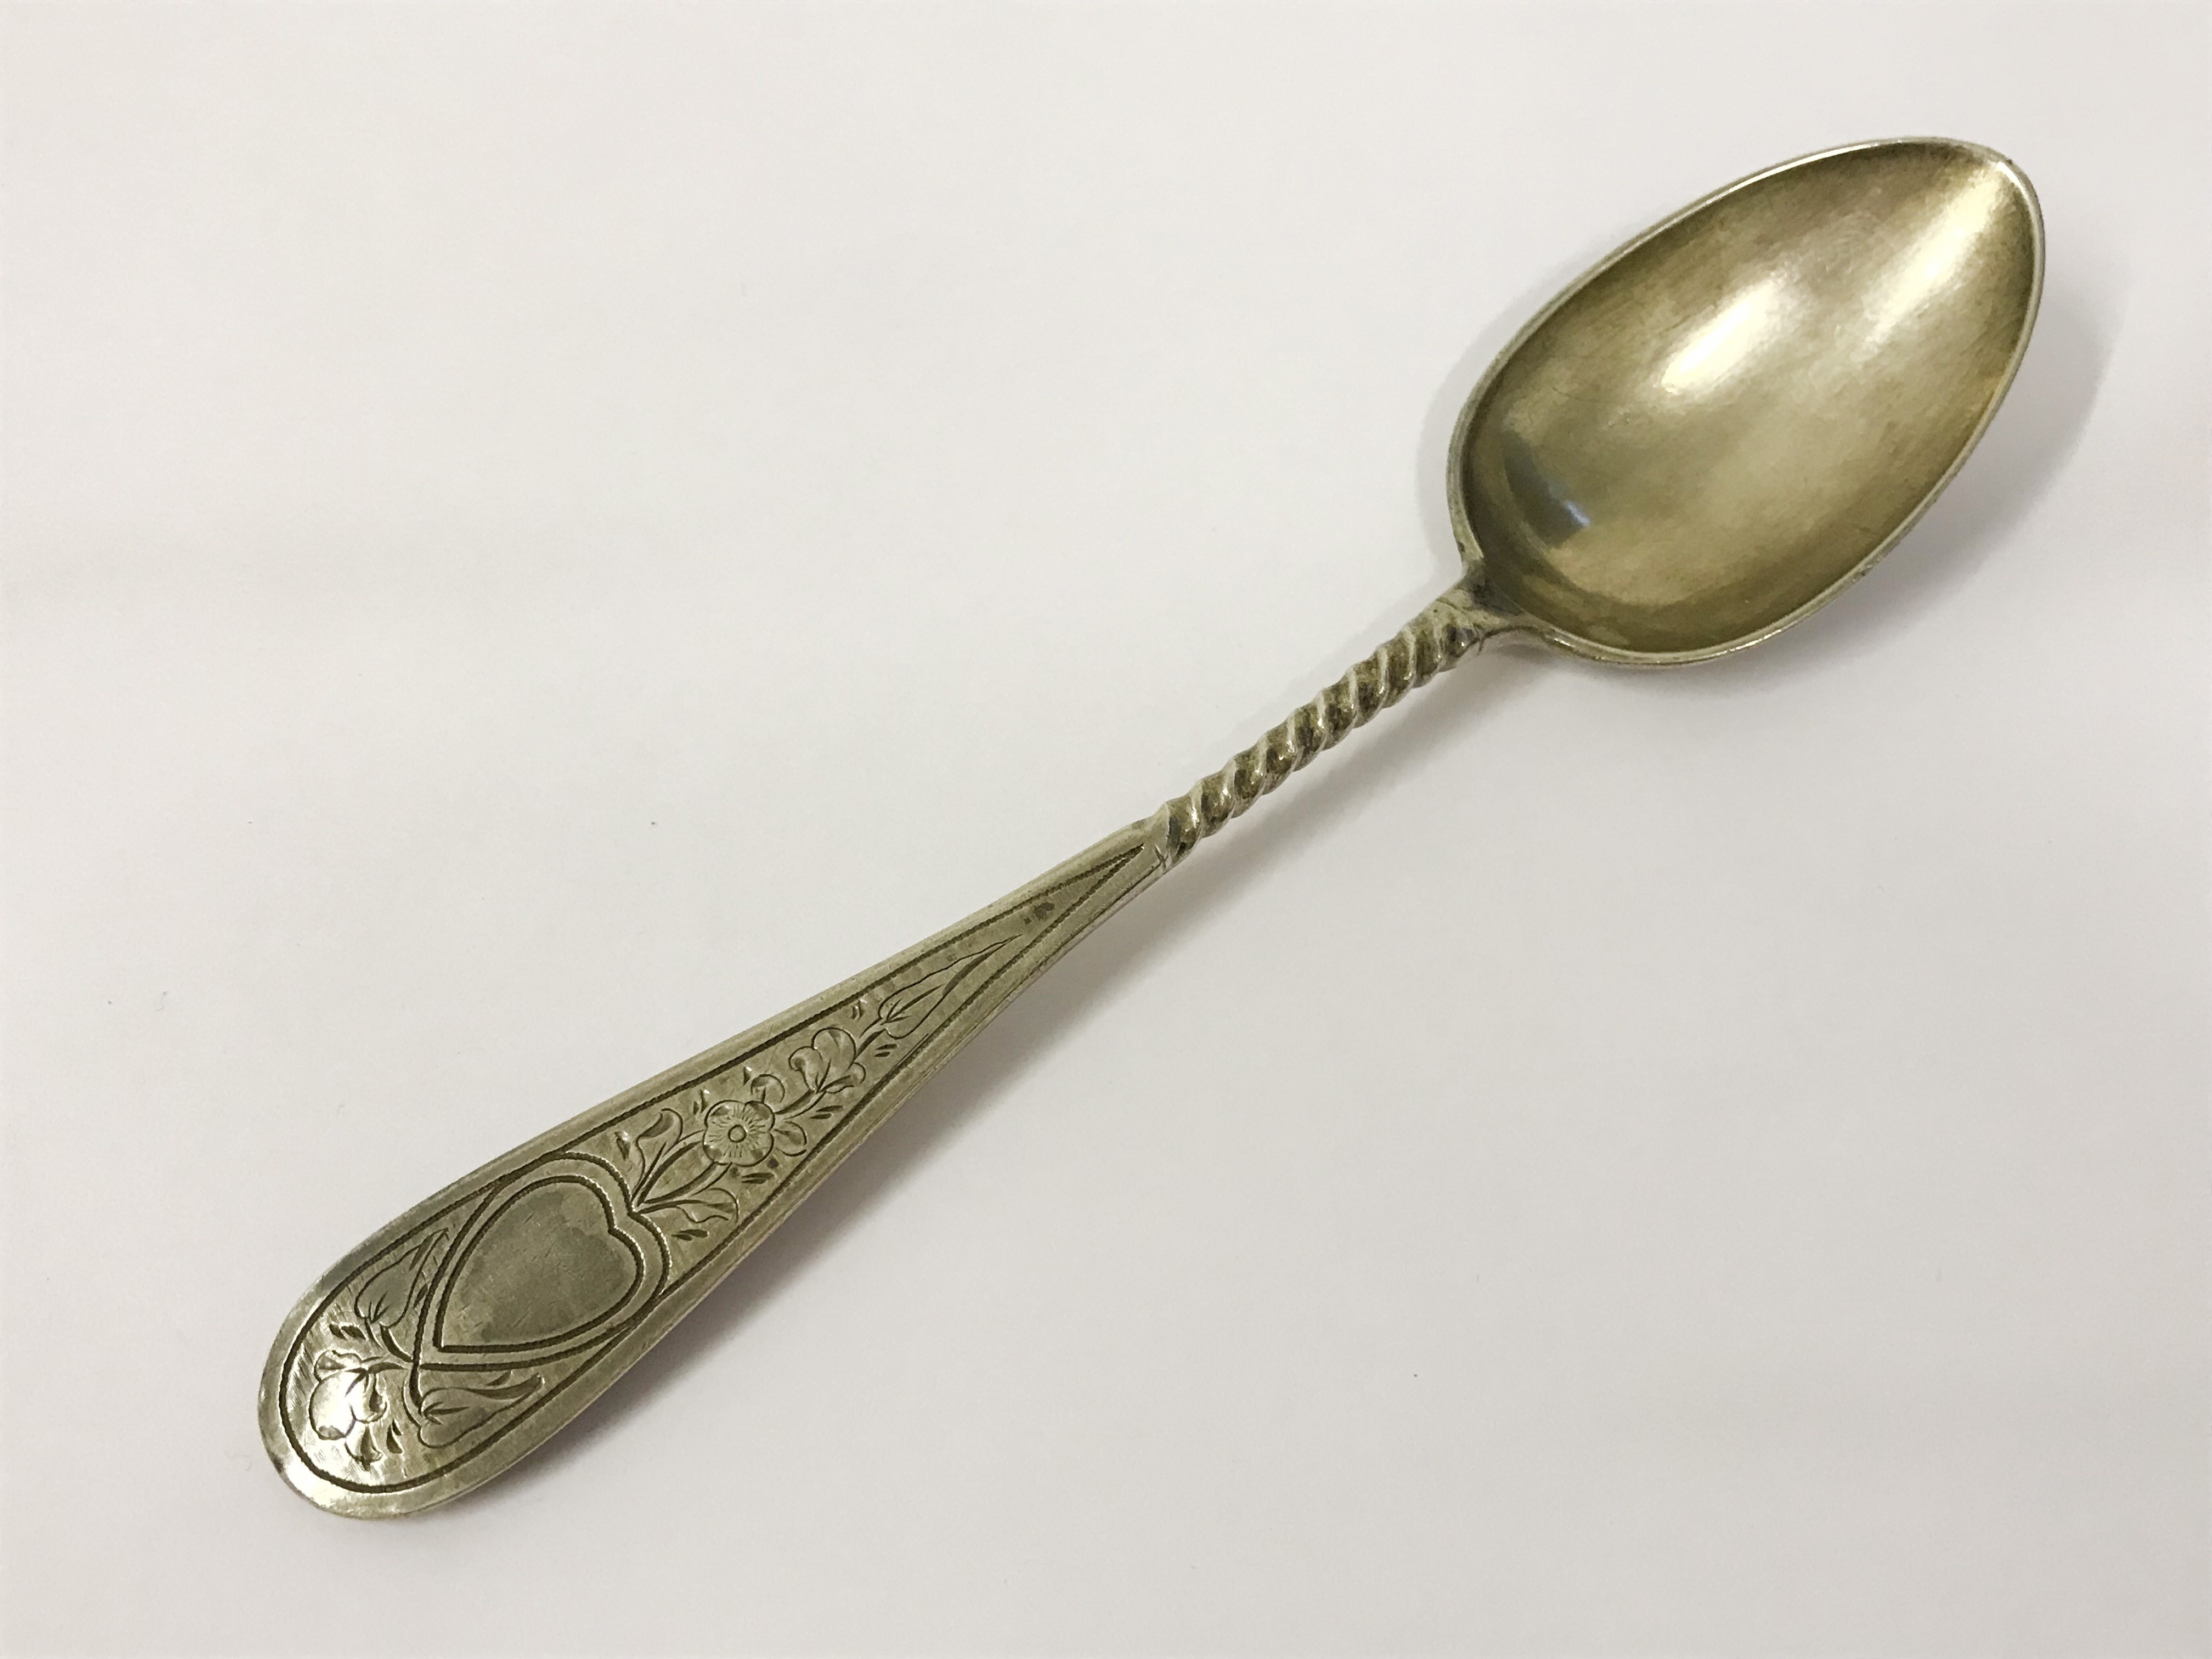 ANTIQUE IMPERIAL RUSSIA HALLMARKED 84 SILVER SPOON 1879